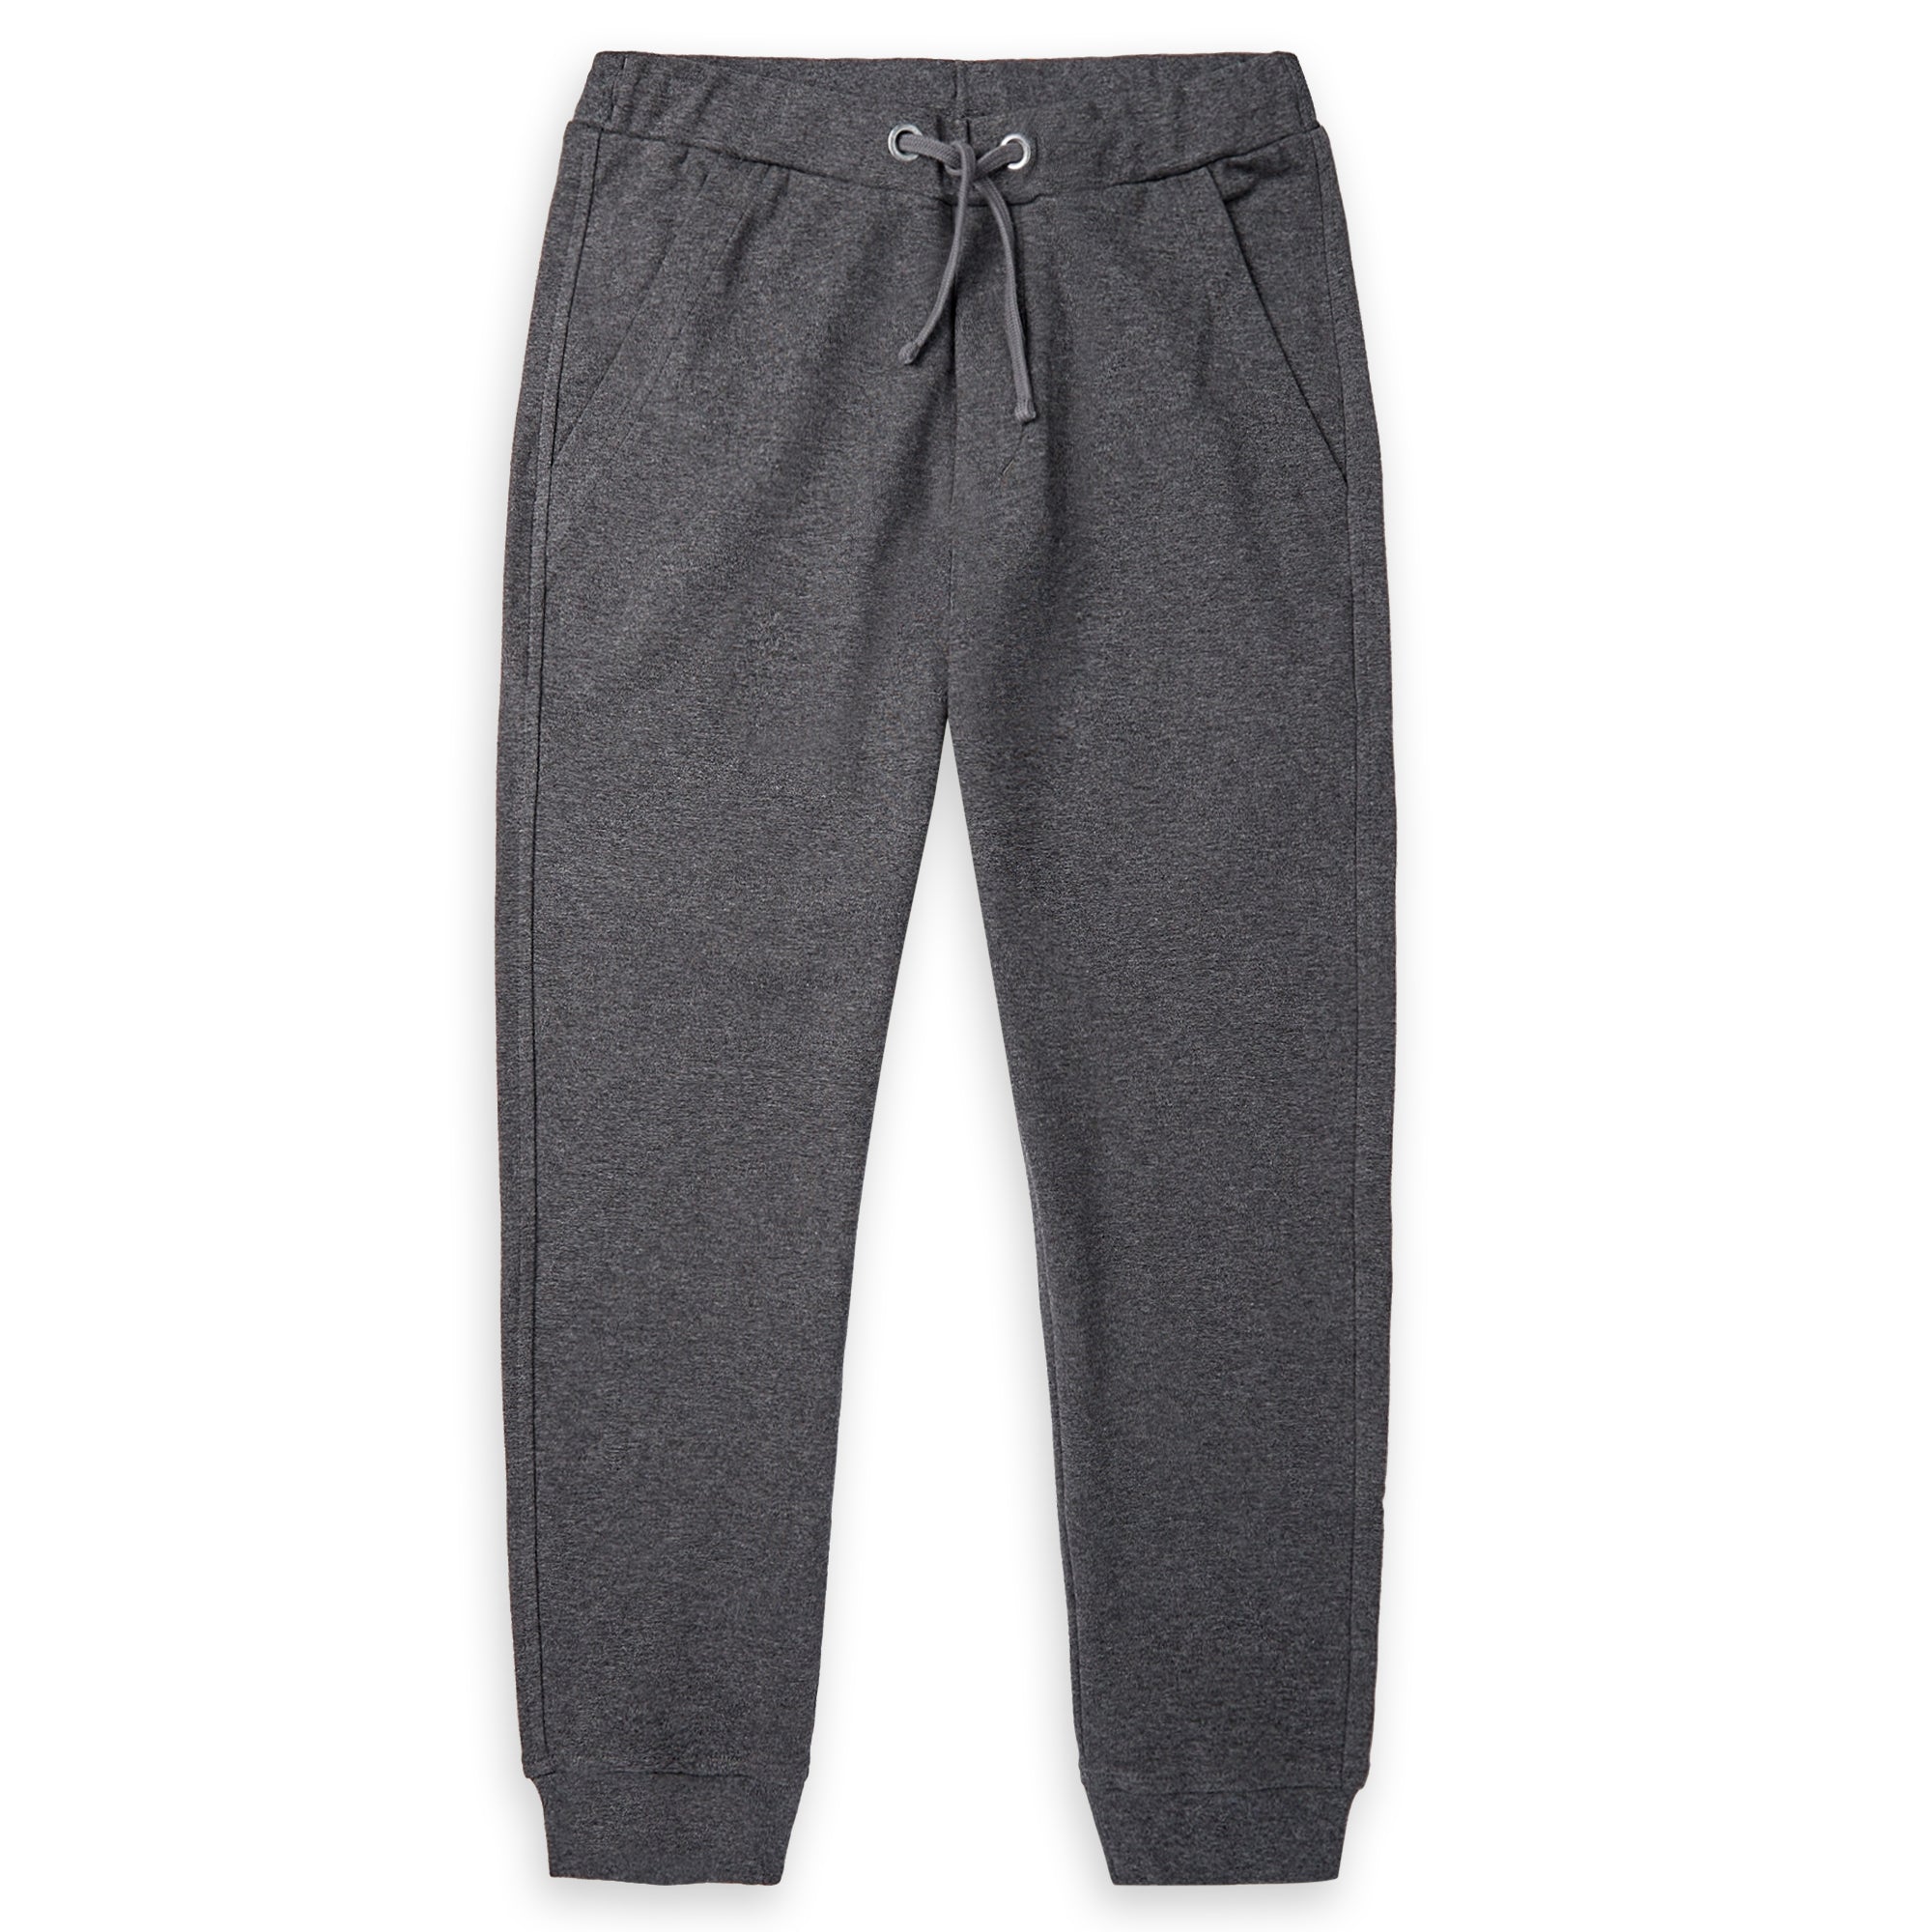 All Day Sweatpants, Charcoal